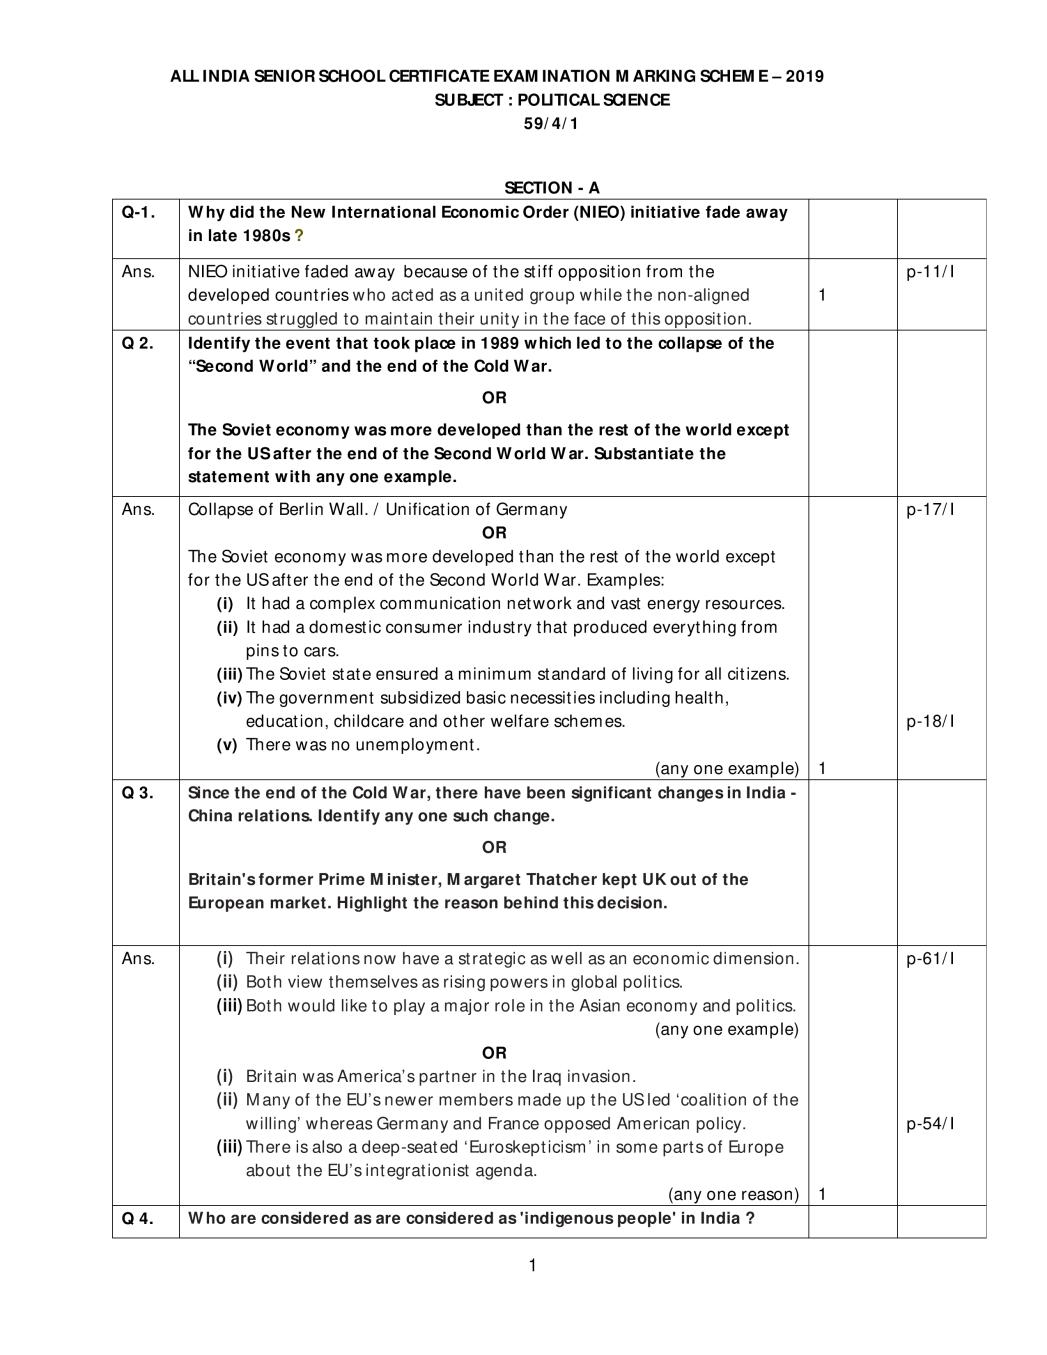 CBSE Class 12 Political Science Question Paper 2019 Set 4 Solutions - Page 1